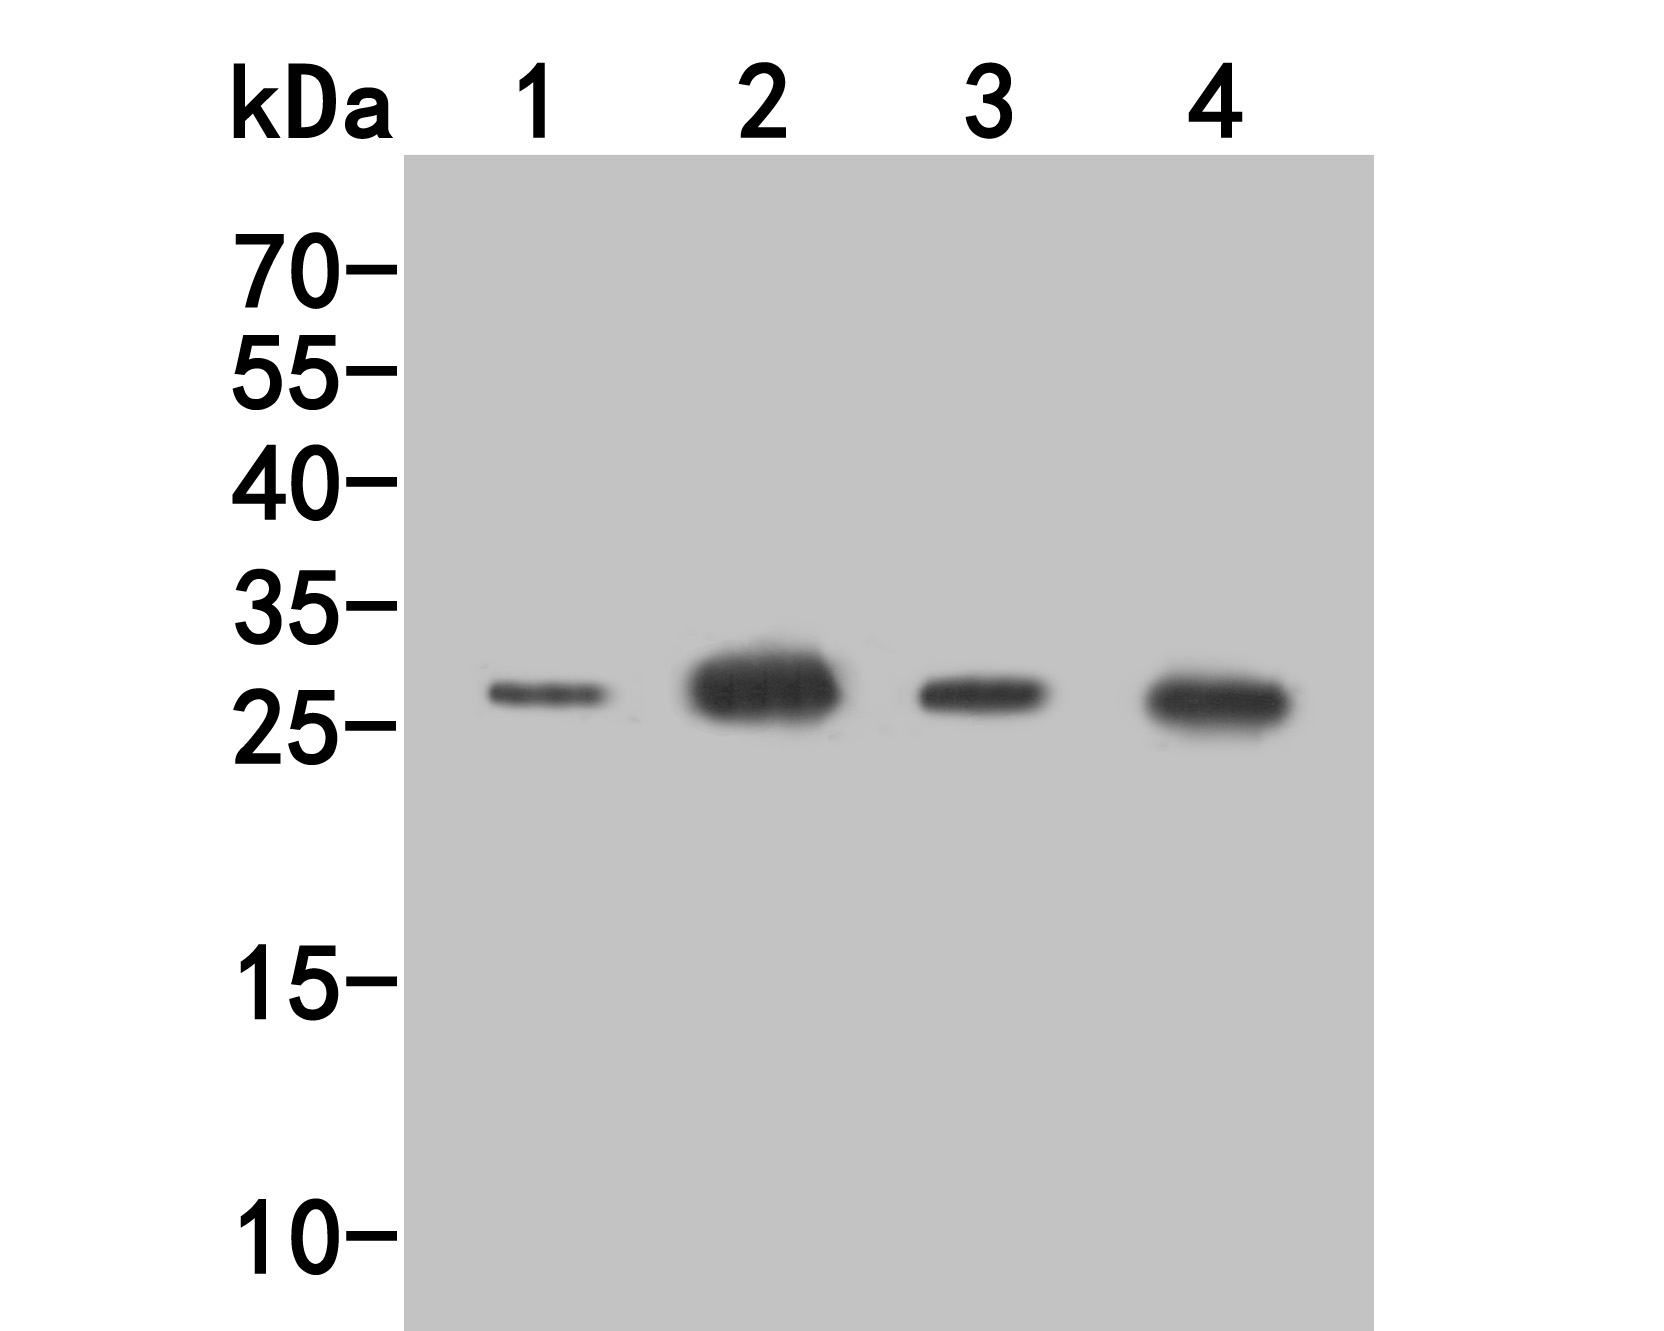 Western blot analysis of CD69 on different lysates. Proteins were transferred to a PVDF membrane and blocked with 5% BSA in PBS for 1 hour at room temperature. The primary antibody (HA500073, 1/500) was used in 5% BSA at room temperature for 2 hours. Goat Anti-Rabbit IgG - HRP Secondary Antibody (HA1001) at 1:5,000 dilution was used for 1 hour at room temperature.<br />
Positive control: <br />
Lane 1: K562 cell lysate<br />
Lane 2: Mouse bone marrow tissue lysate<br />
Lane 3: Mouse spleen tissue lysate<br />
Lane 4: HL-60 cell lysate